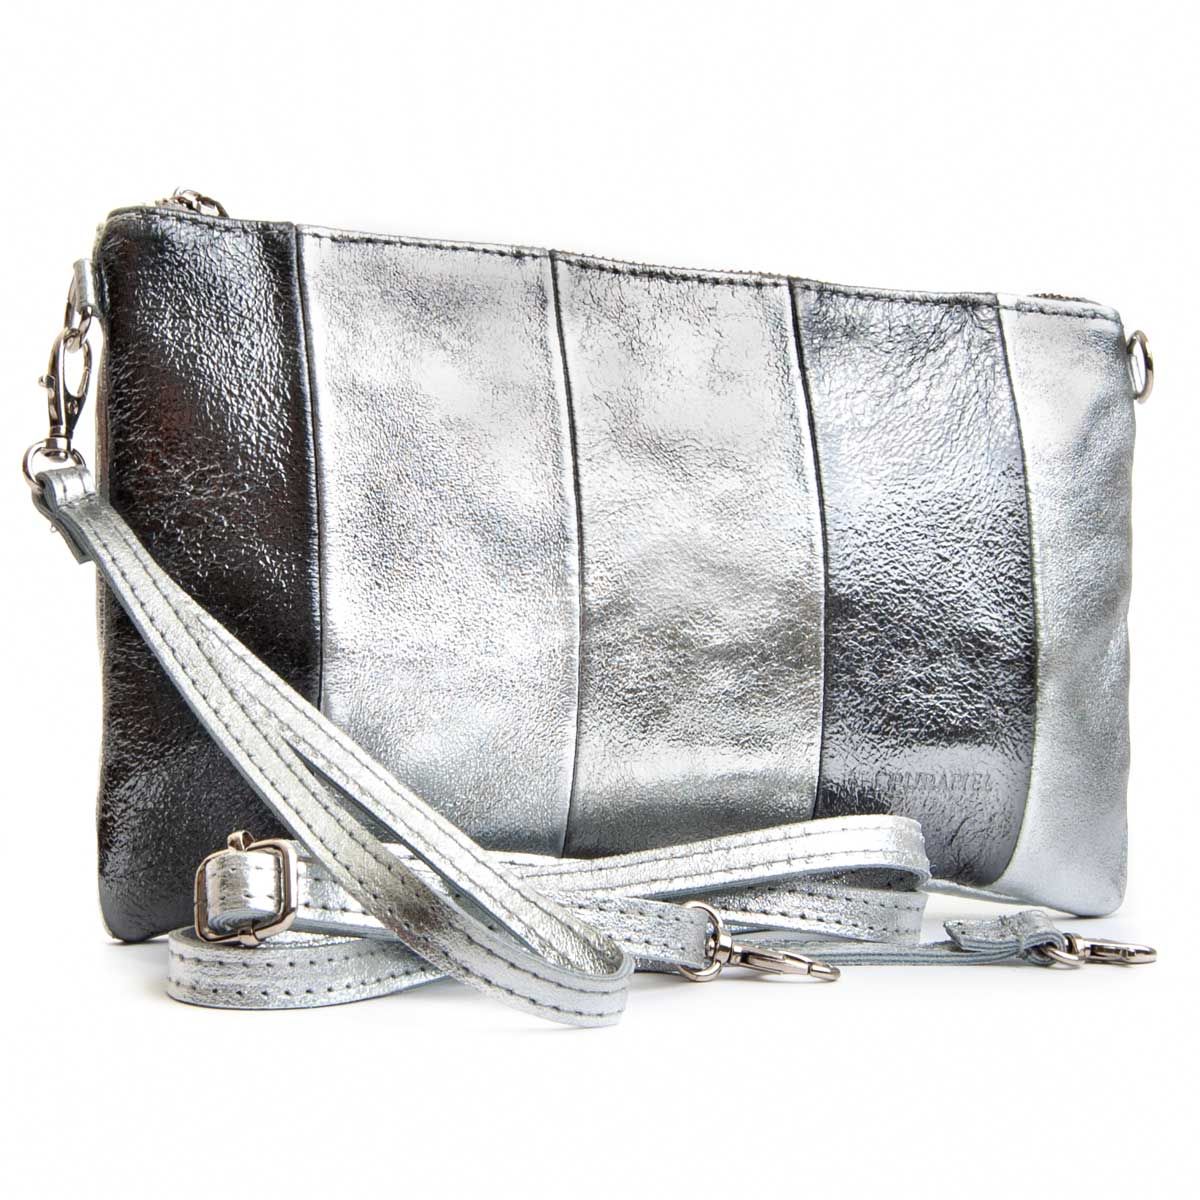 Exclusive design leather bag. Made of 100% natural chrome -free leather VI. Long adjustable handle and with an option to remove with metal carabiners. High quality zip closure. Interior apartment with zipper. A bag that cannot be missing in your closet. Doubly reinforced for greater durability. Approximate measures: 17cm high 26cm Width Depth 8cm. 10 years warranty. Purapiel guarantee. Made in Spain.